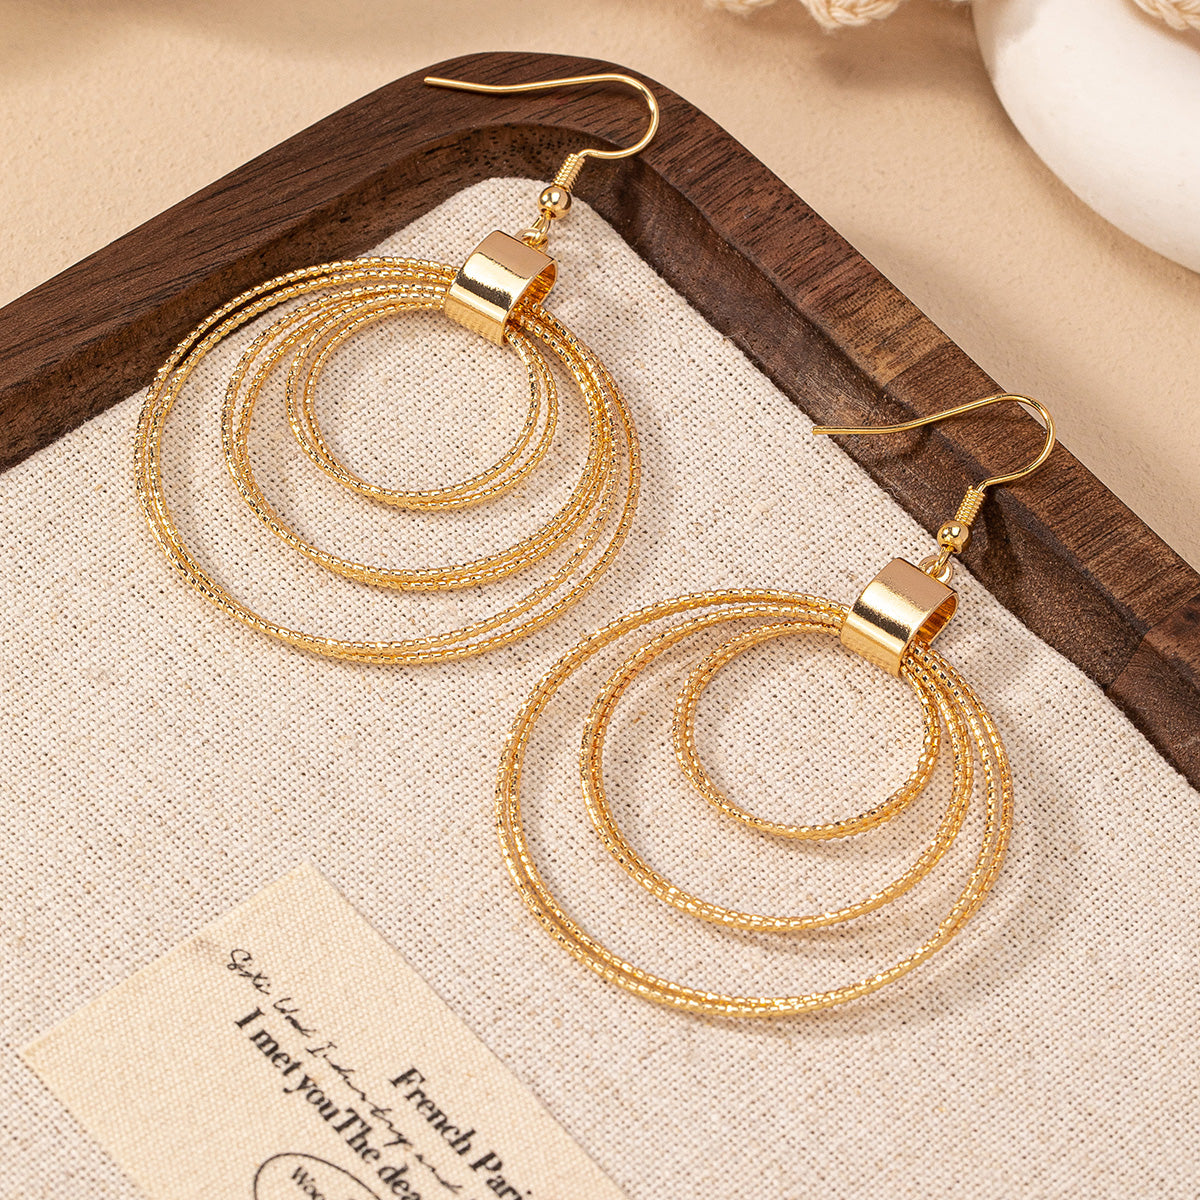 1 Pair IG Style Exaggerated Modern Style Round Hollow Out Iron Drop Earrings